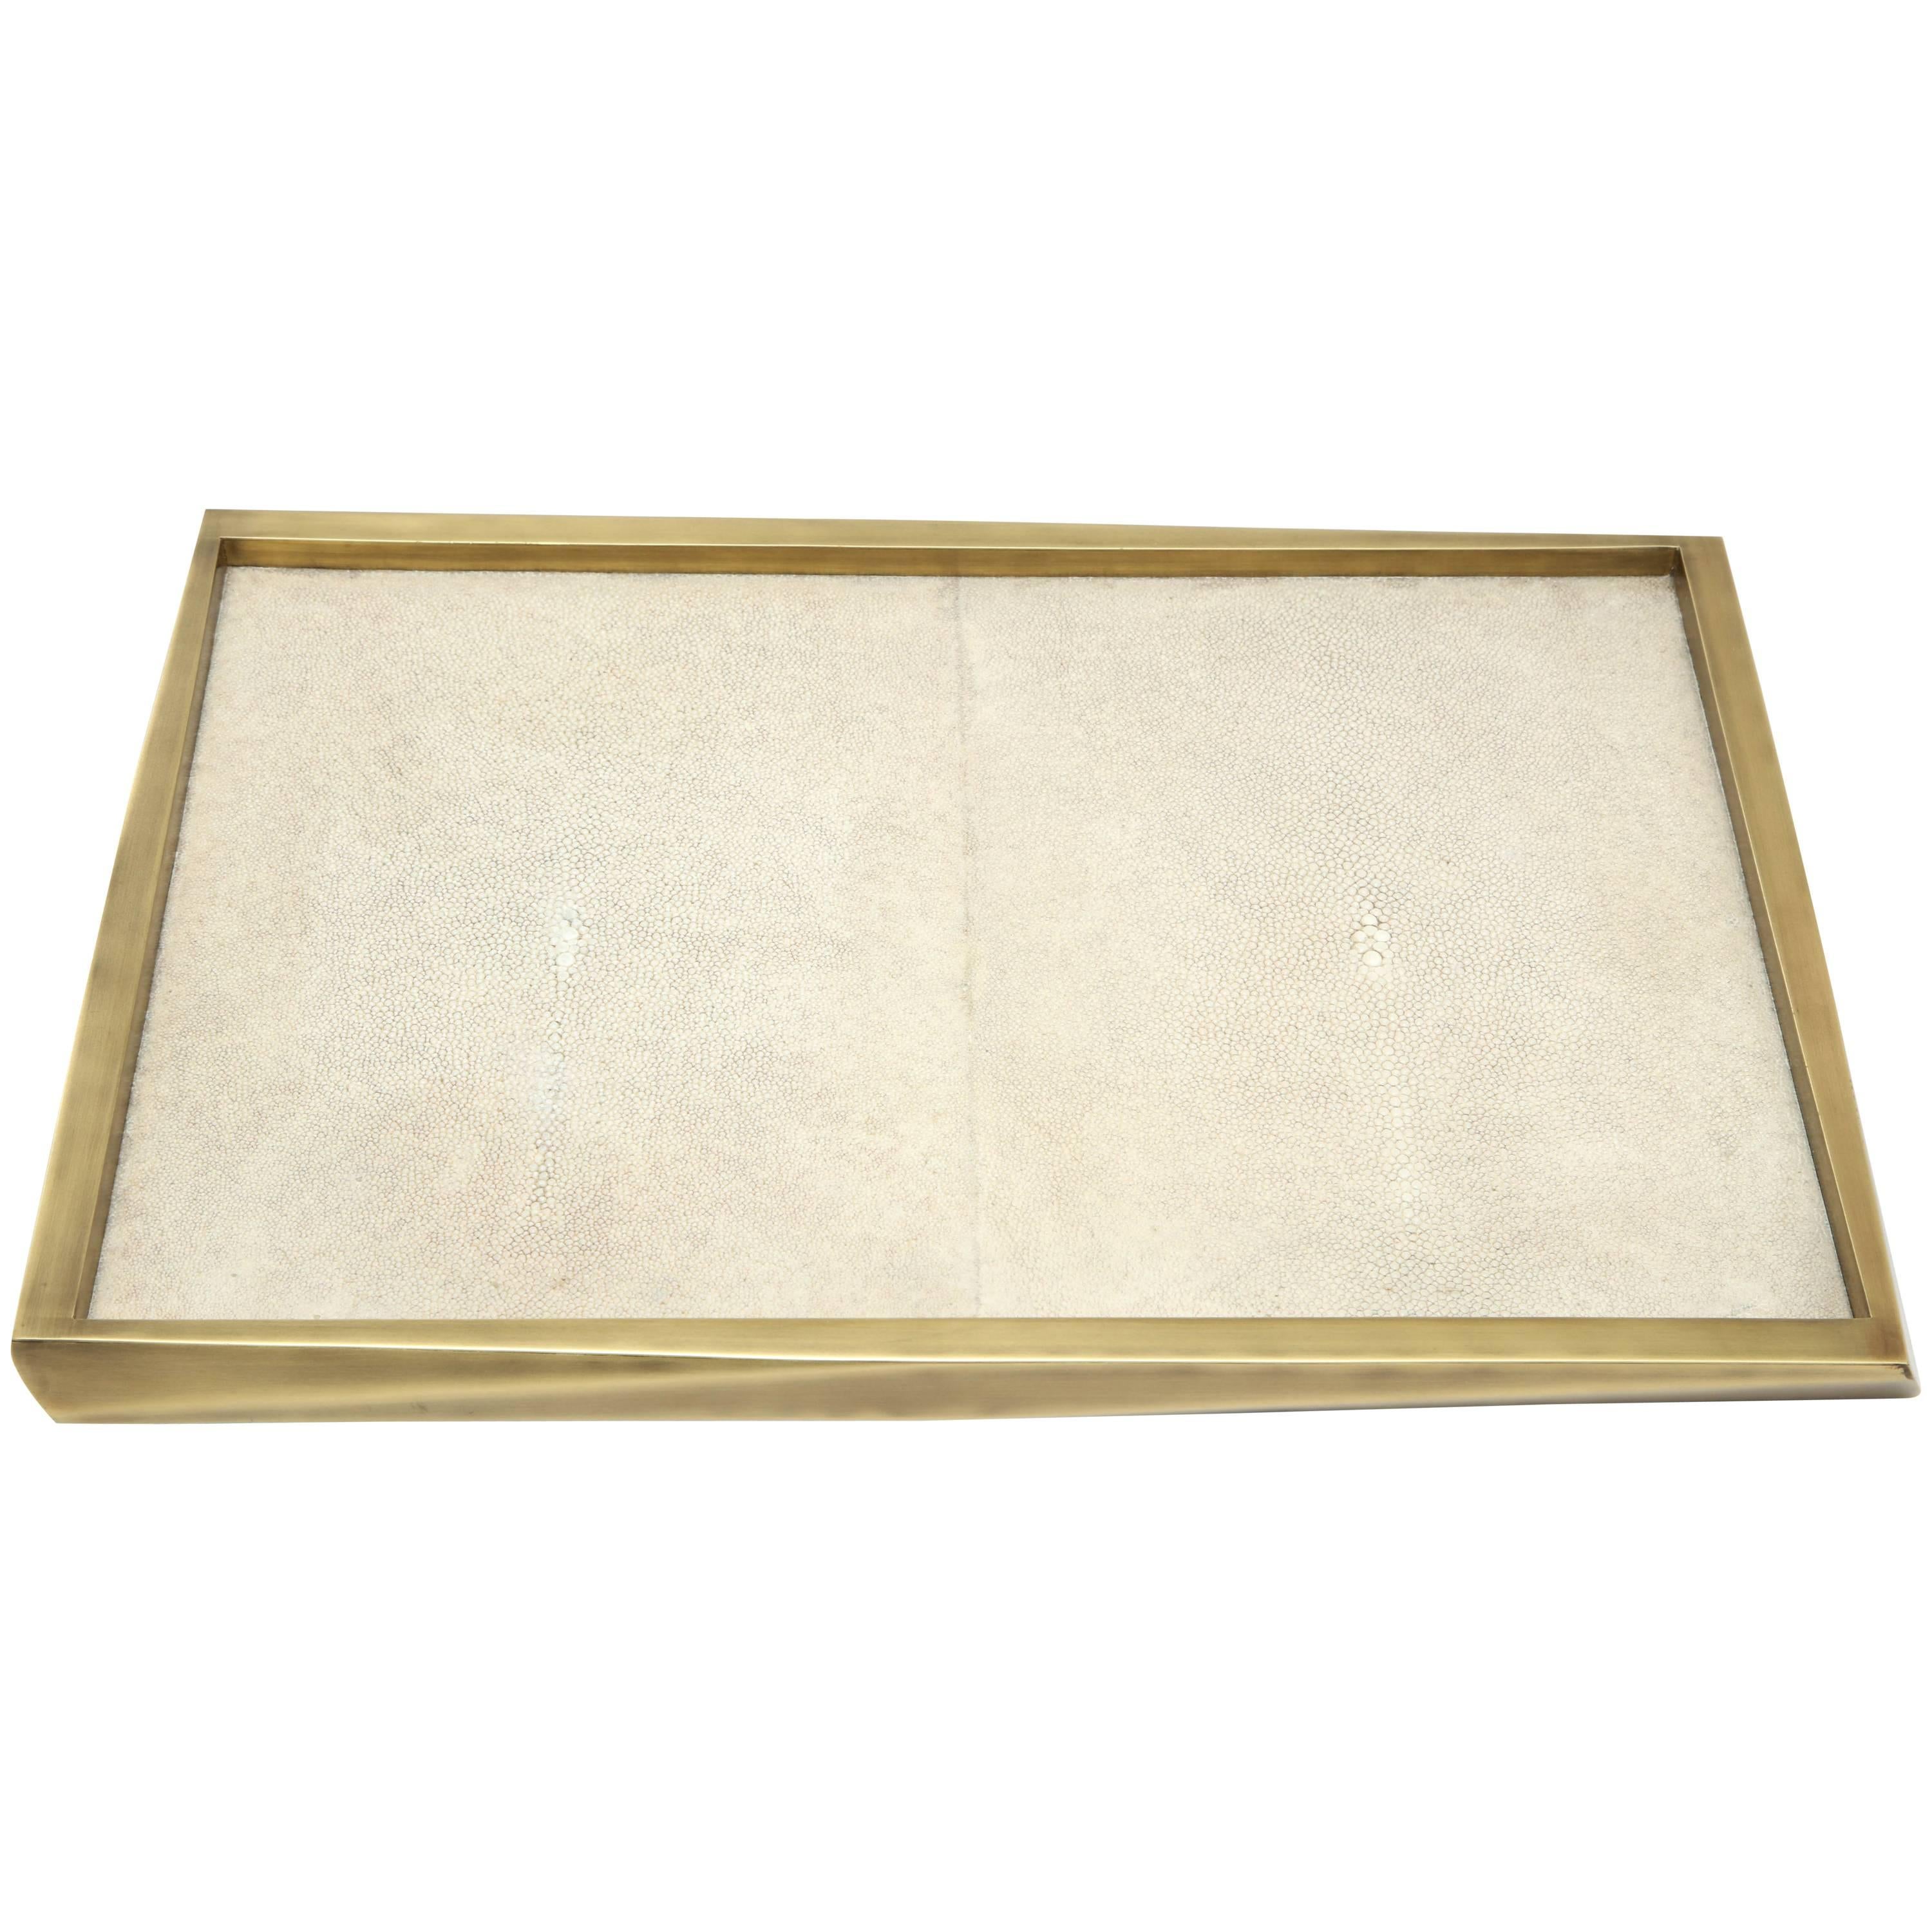 Shagreen Tray with Bronze Details